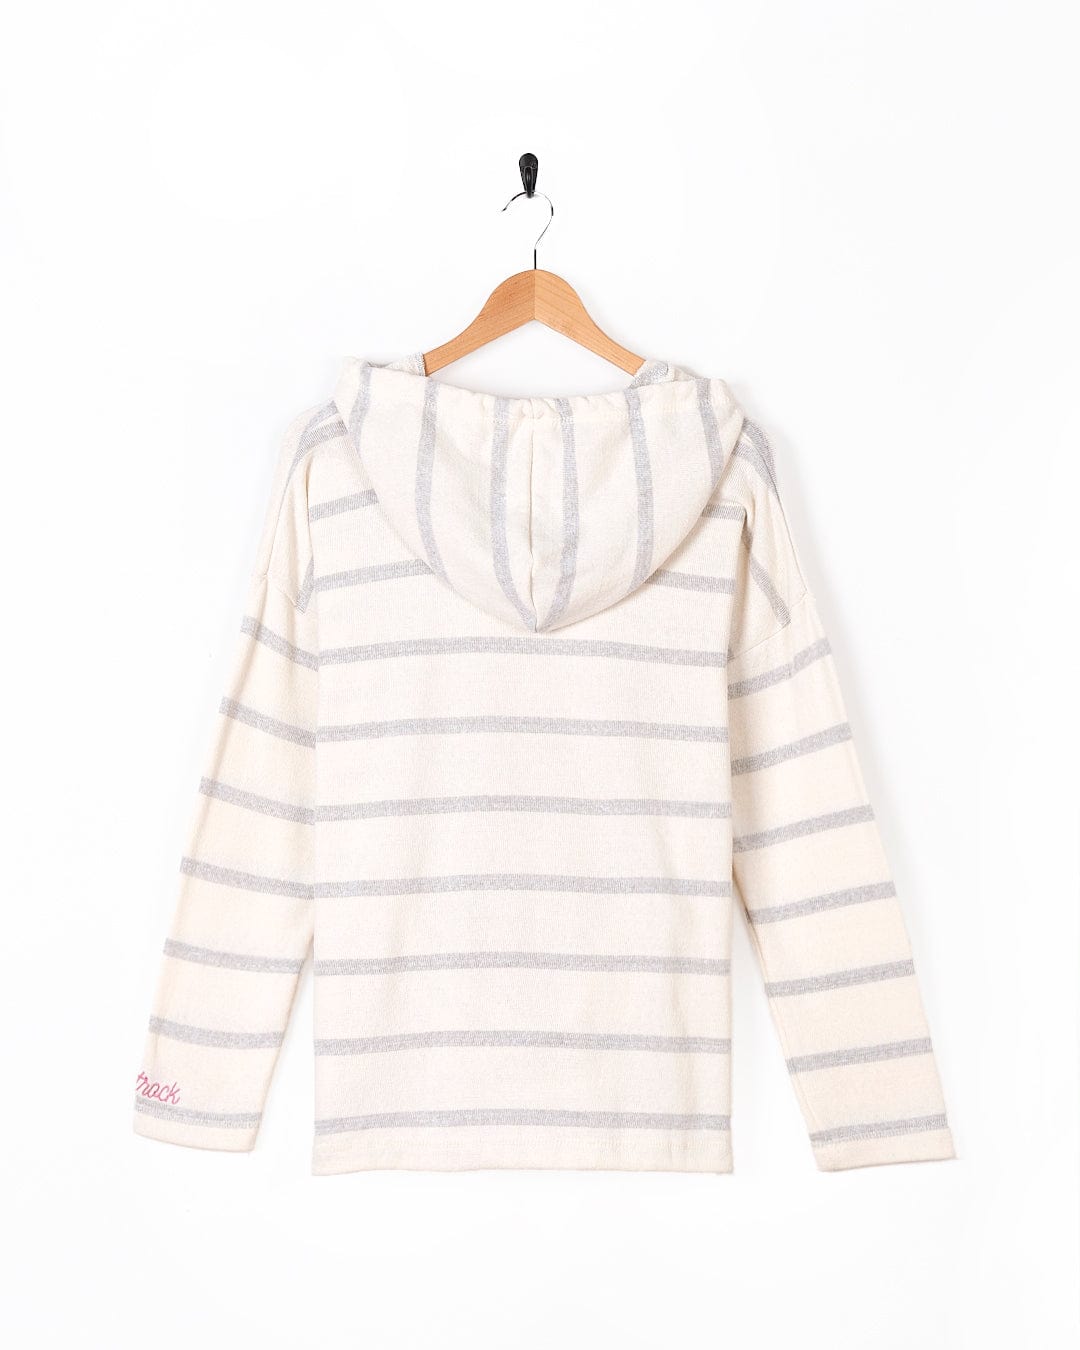 A Saltrock Kennedy - Womens Pop Hoodie - Cream, white and grey striped hoodie hanging on a wooden hanger.